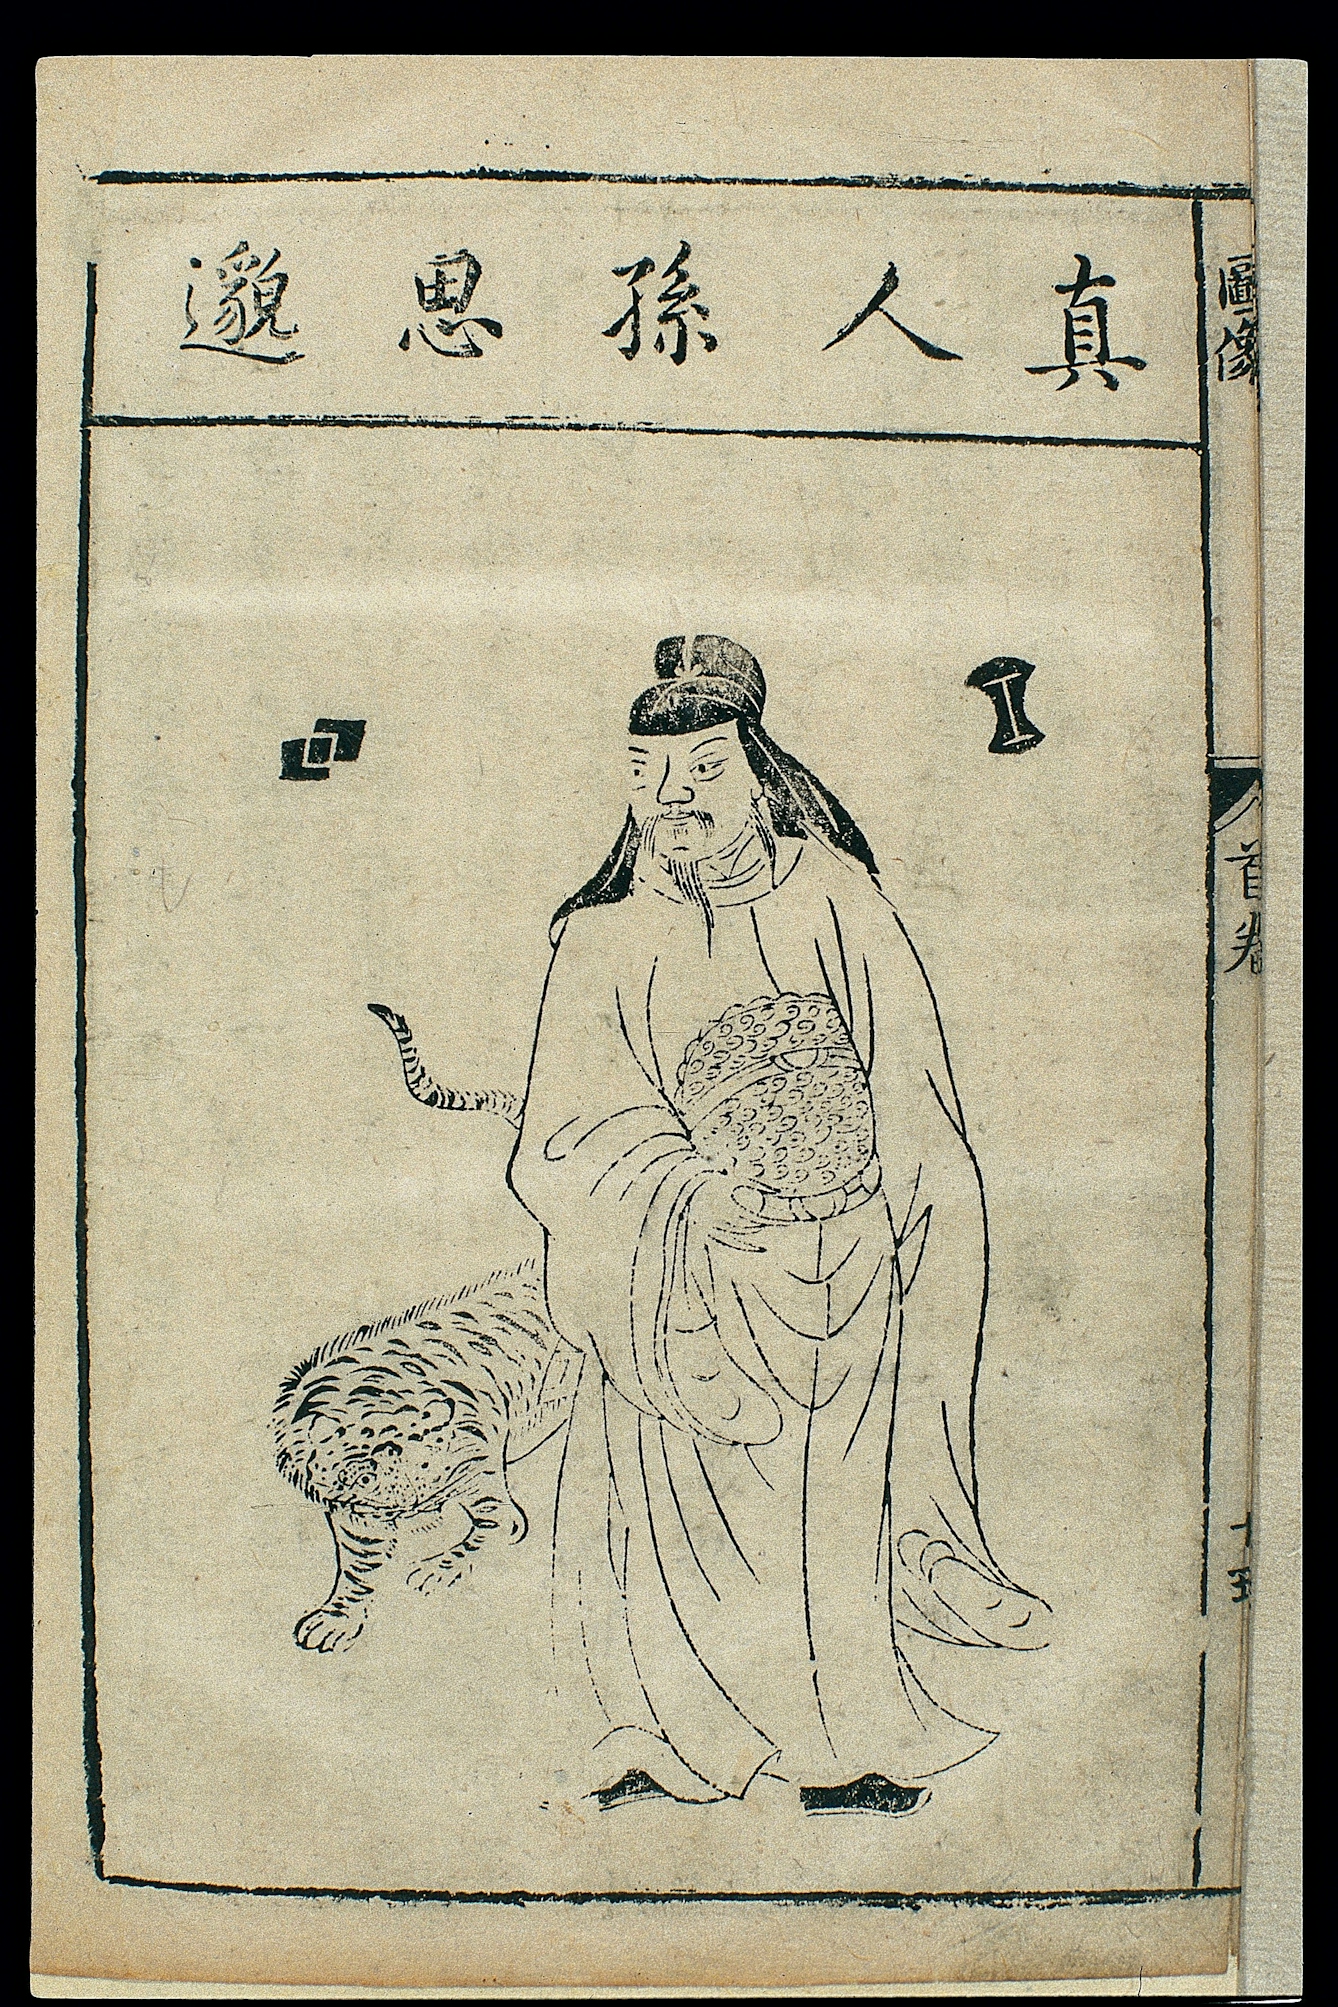 Woodcut depicting Sun Simiao wearing robes and standing beside some sort of large cat (possibly a tiger).